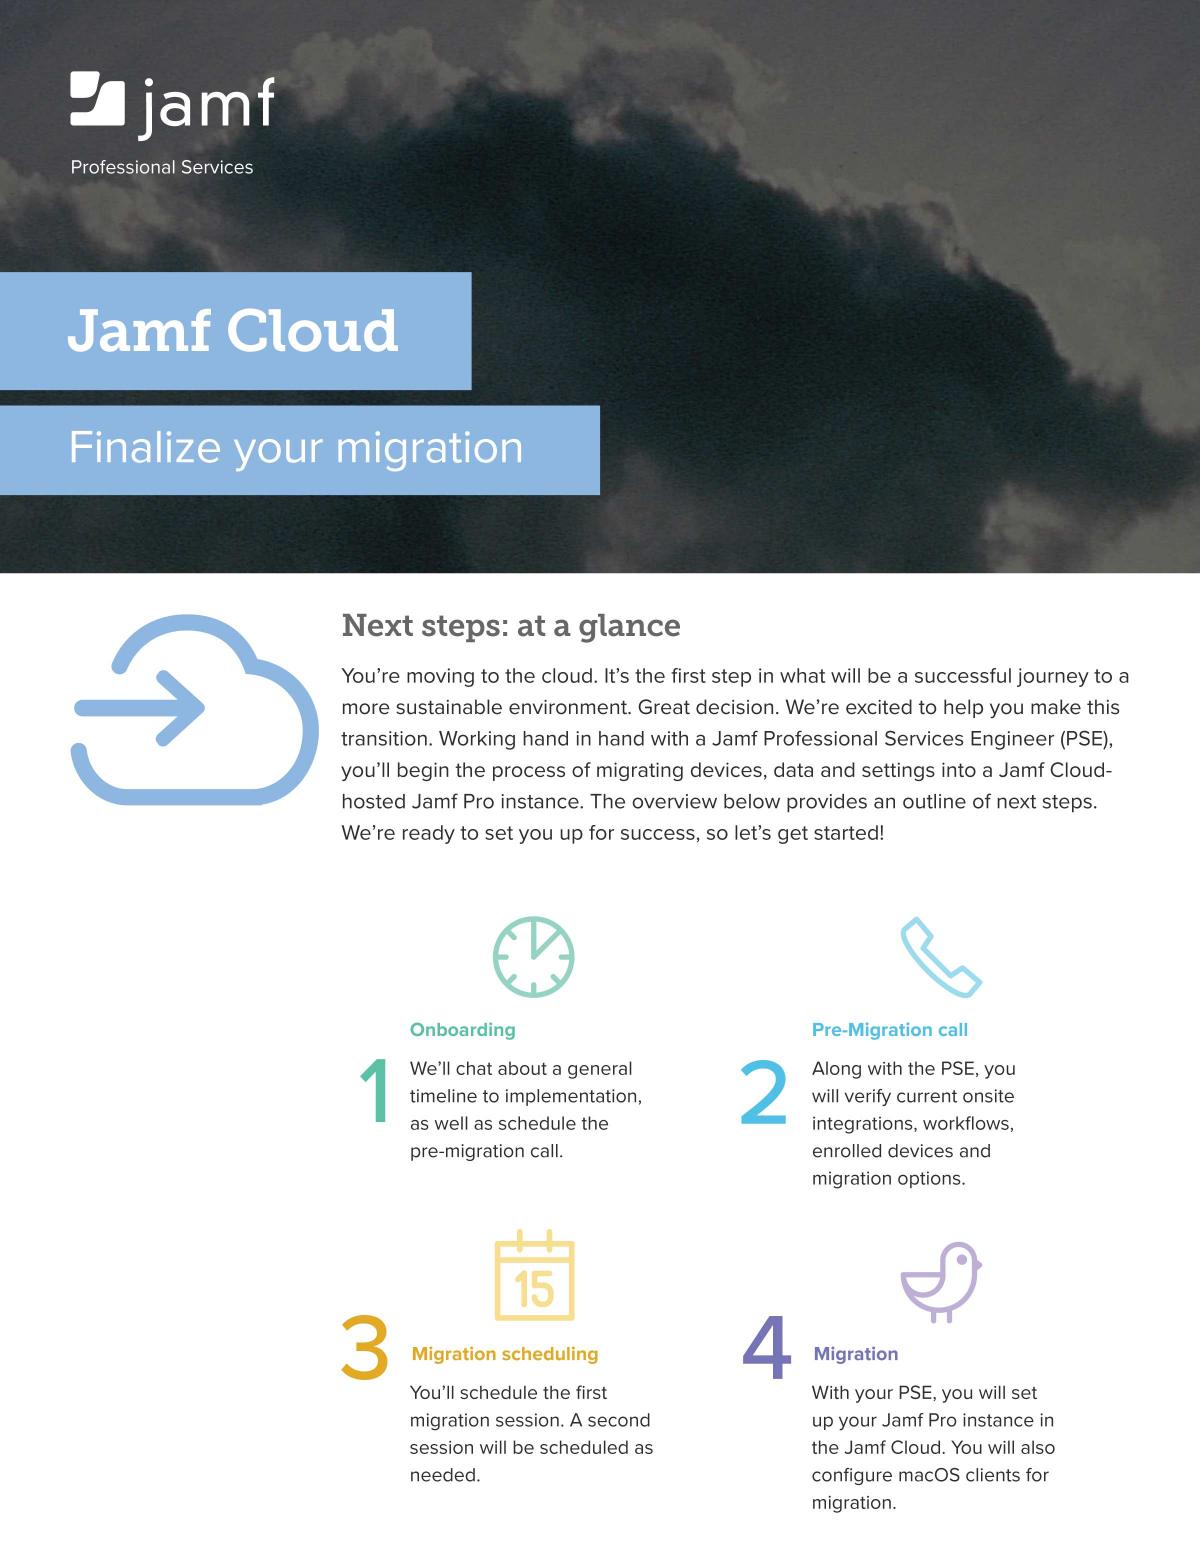 what is jamf cloud